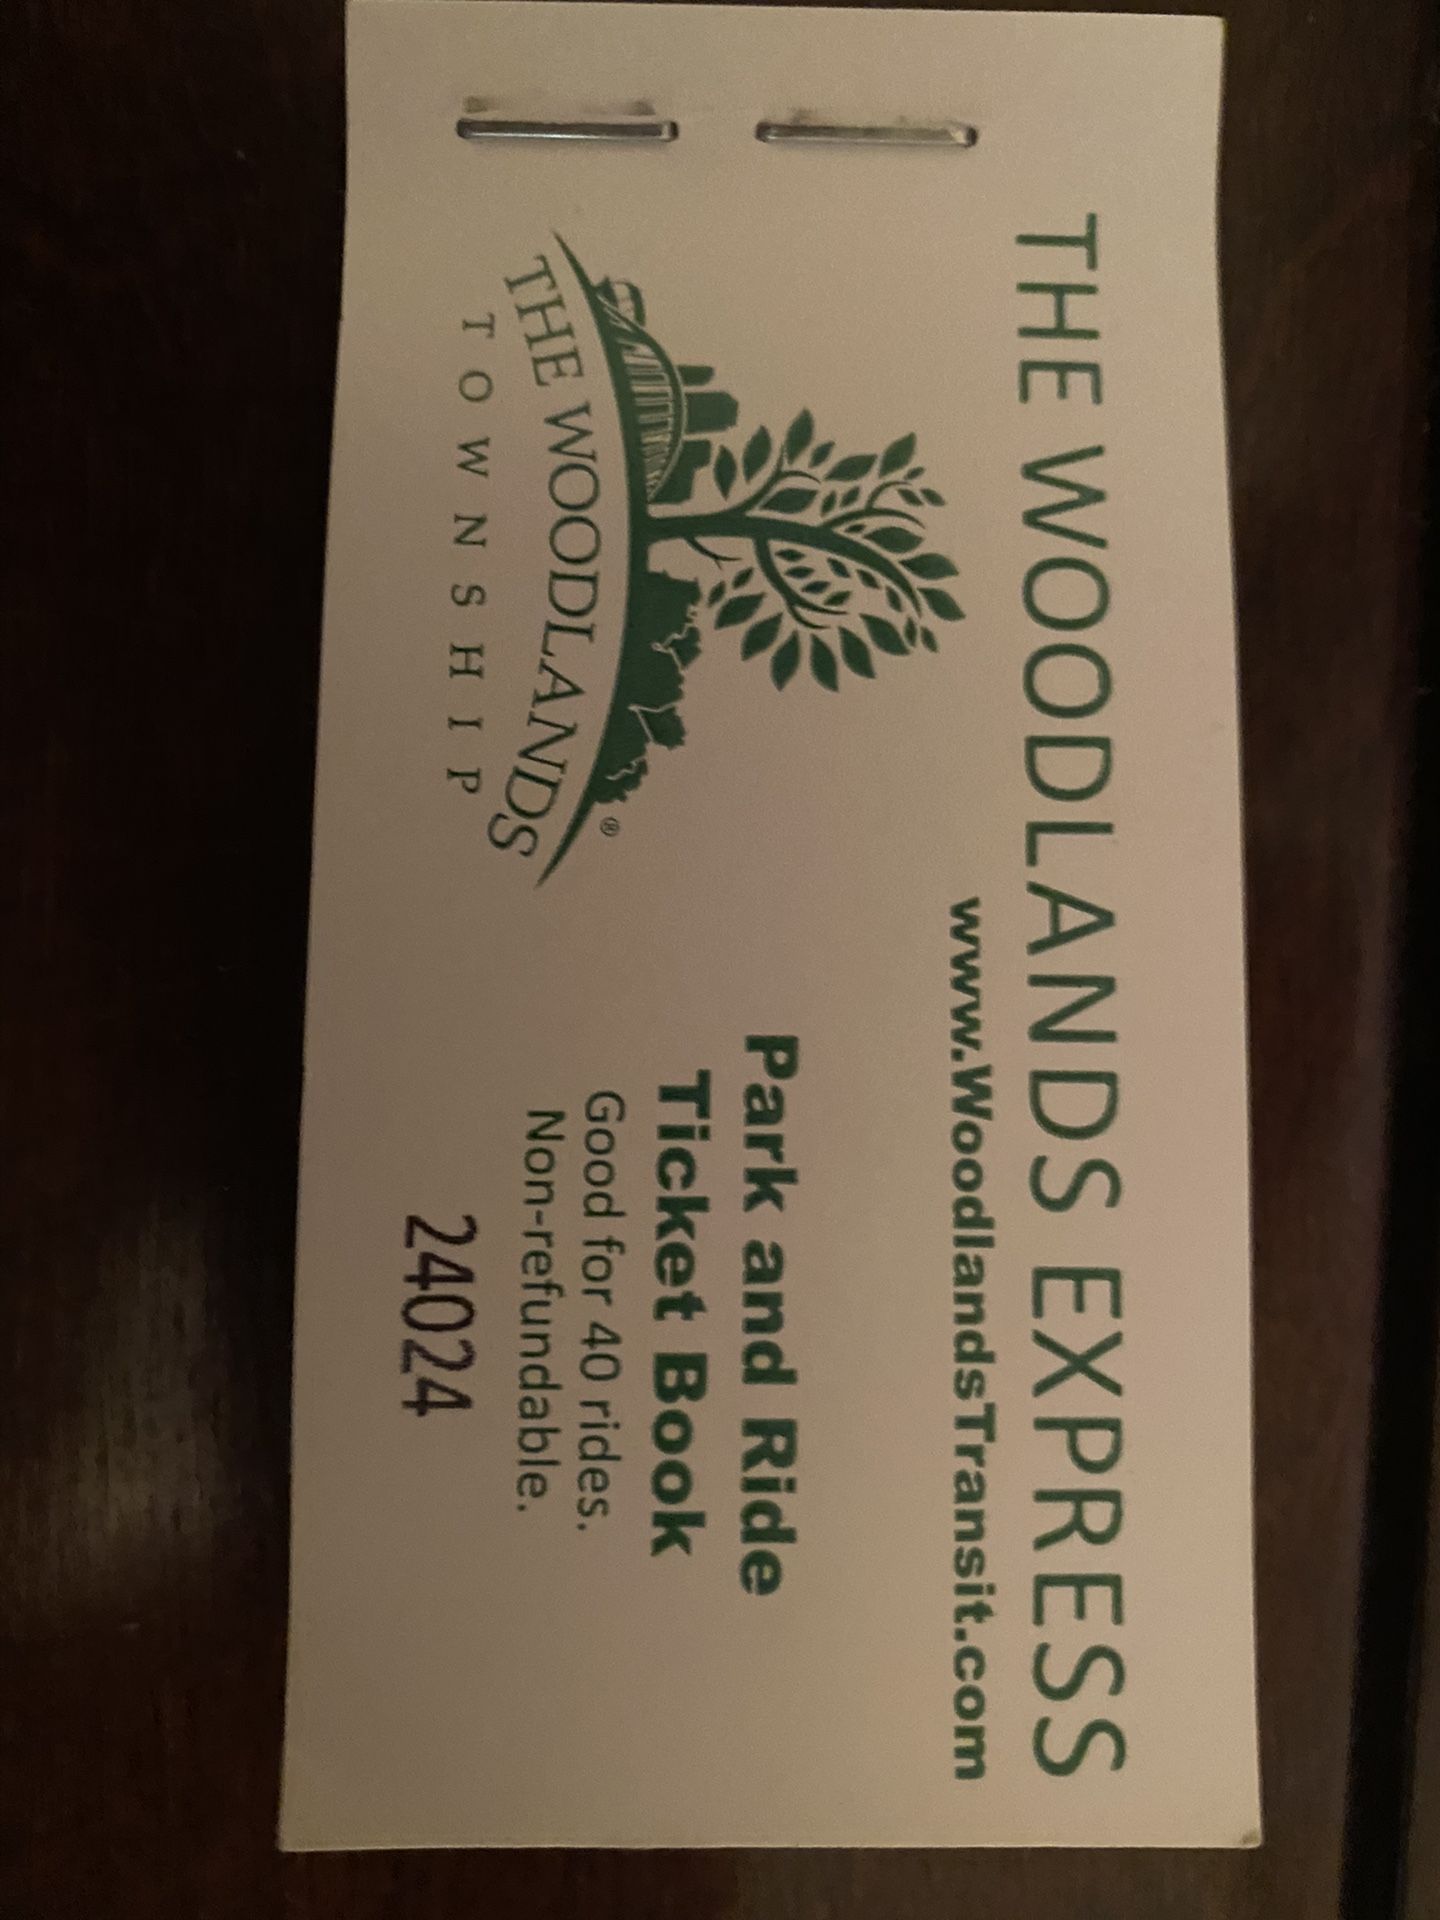 The Woodlands Express tickets